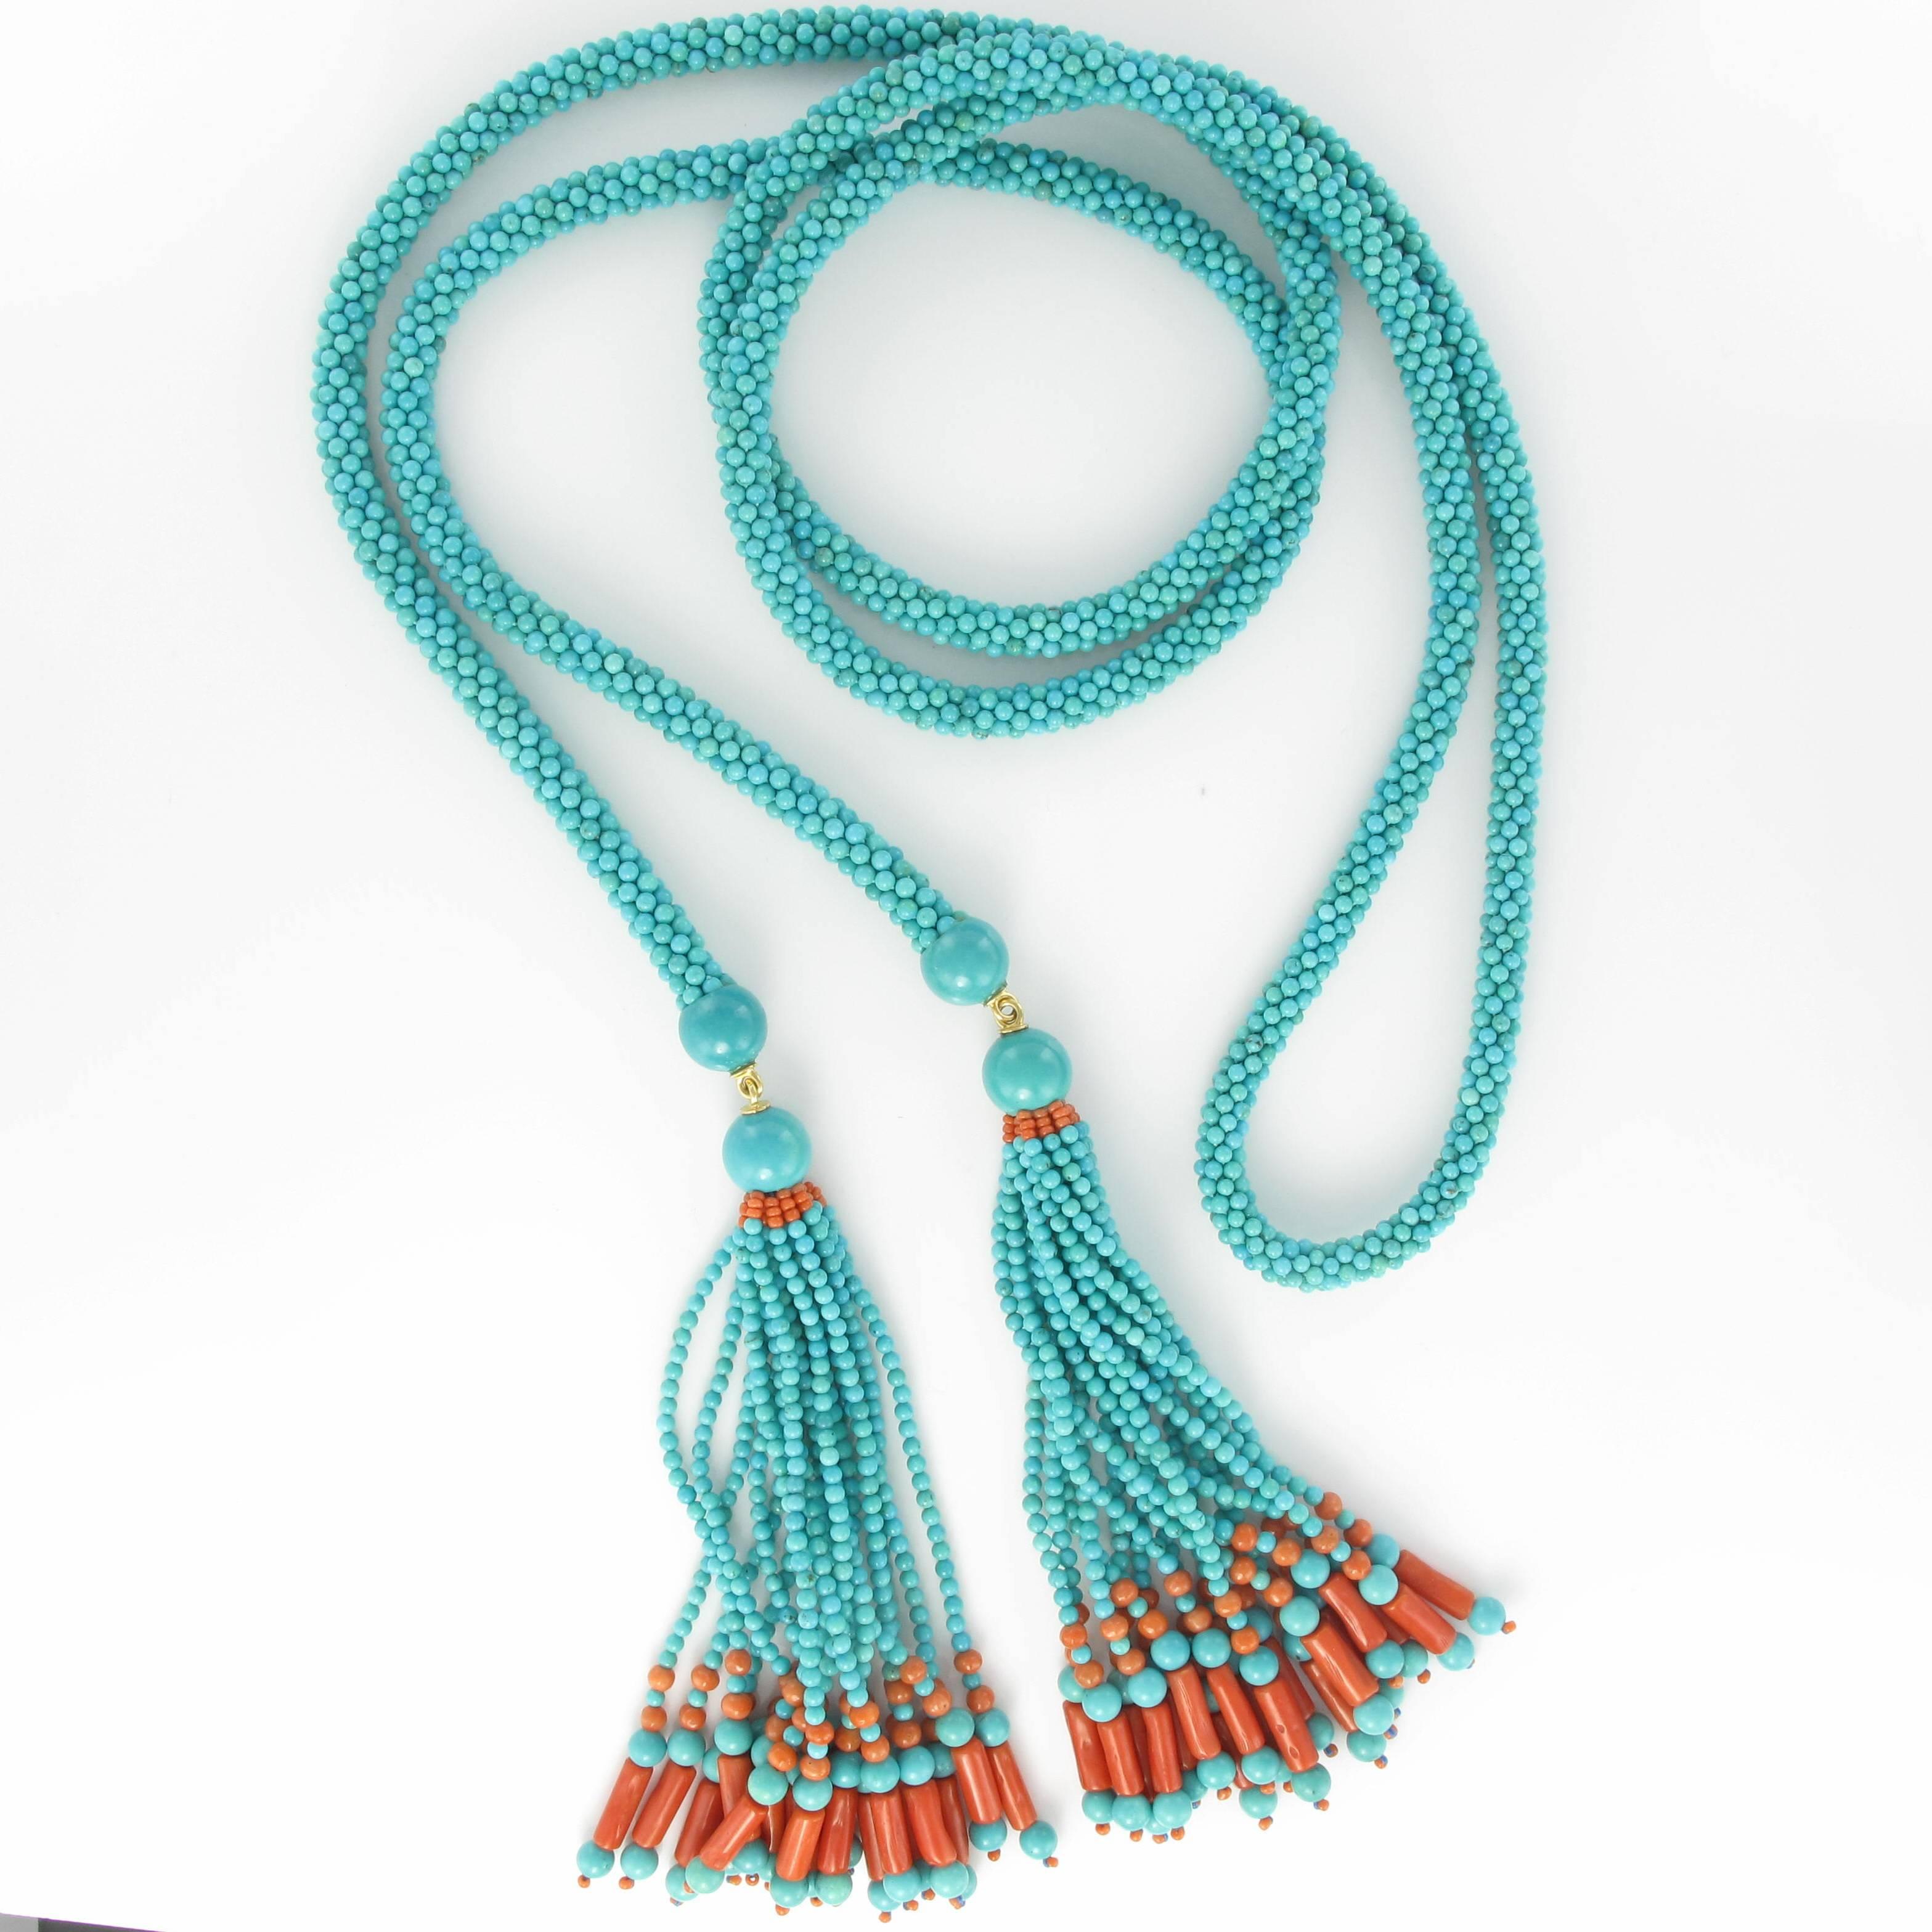 Baume creation - unique piece

A rope style ‘Tie’ necklace made of many small turquoise beads. At each end, two large turquoise beads hold two gold rings each with tassels leading to 18 strands of turquoise beads decorated with coral beads and